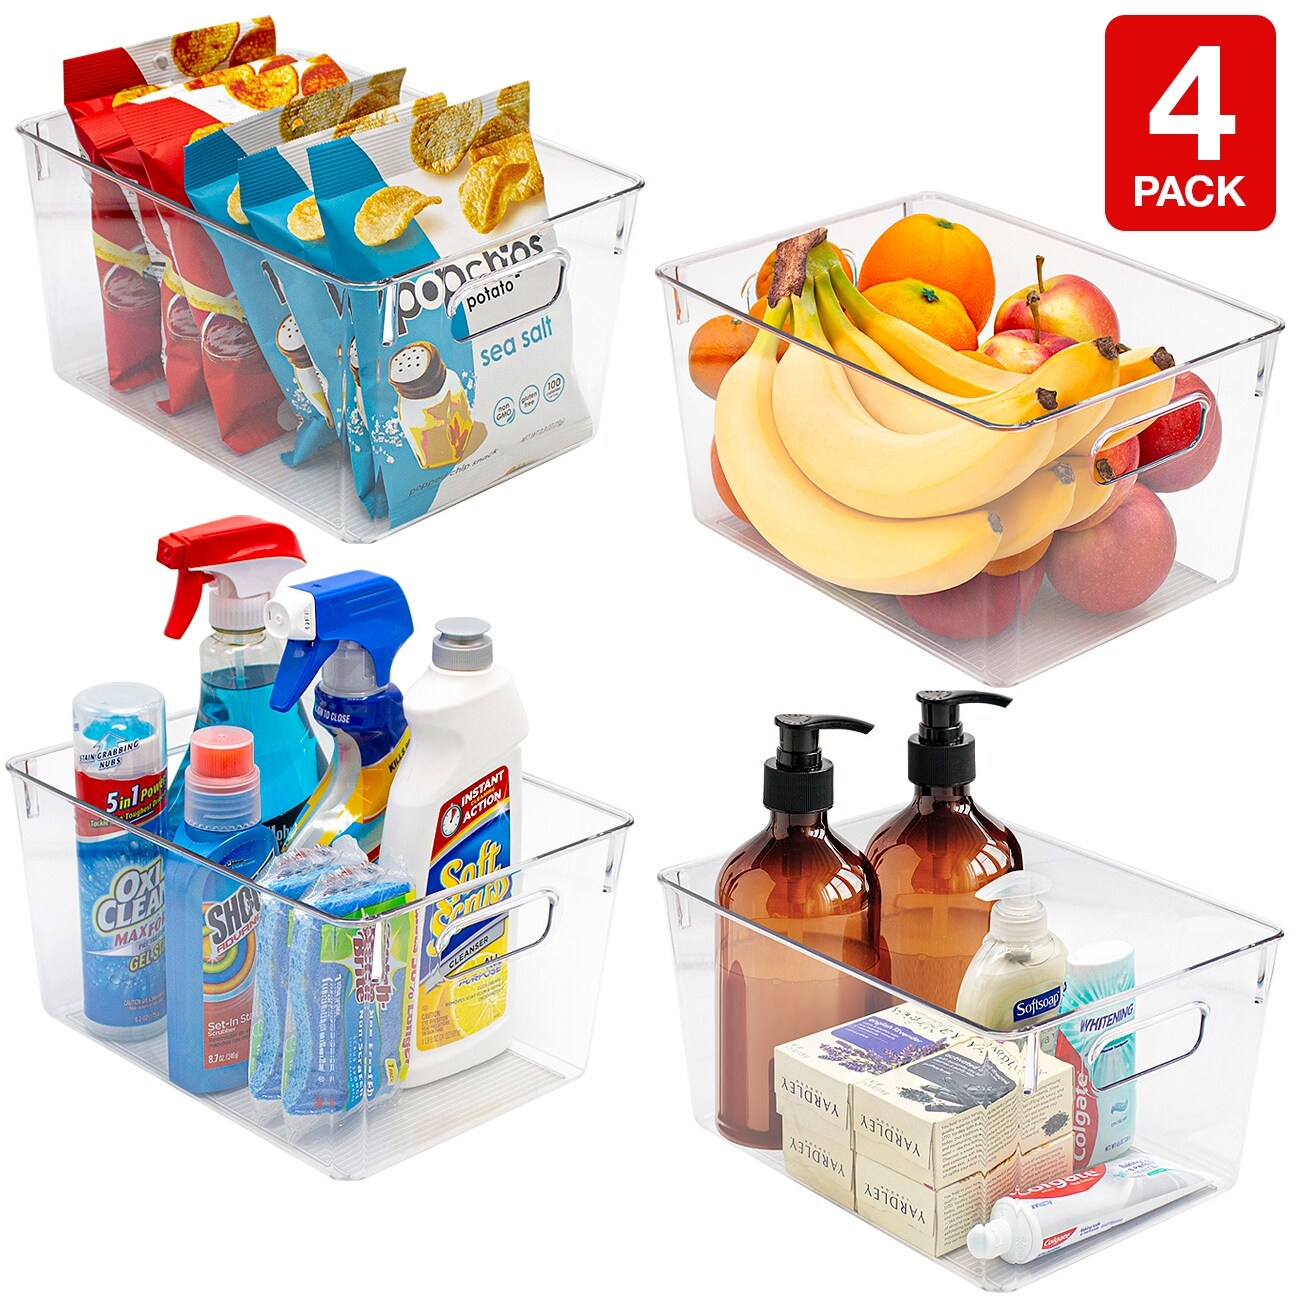 https://ak1.ostkcdn.com/images/products/is/images/direct/136b7285b436ed72eb1e38764a903e11b03dfd26/Set-of-Big-Square-Fridge-Bin-With-Handles.jpg